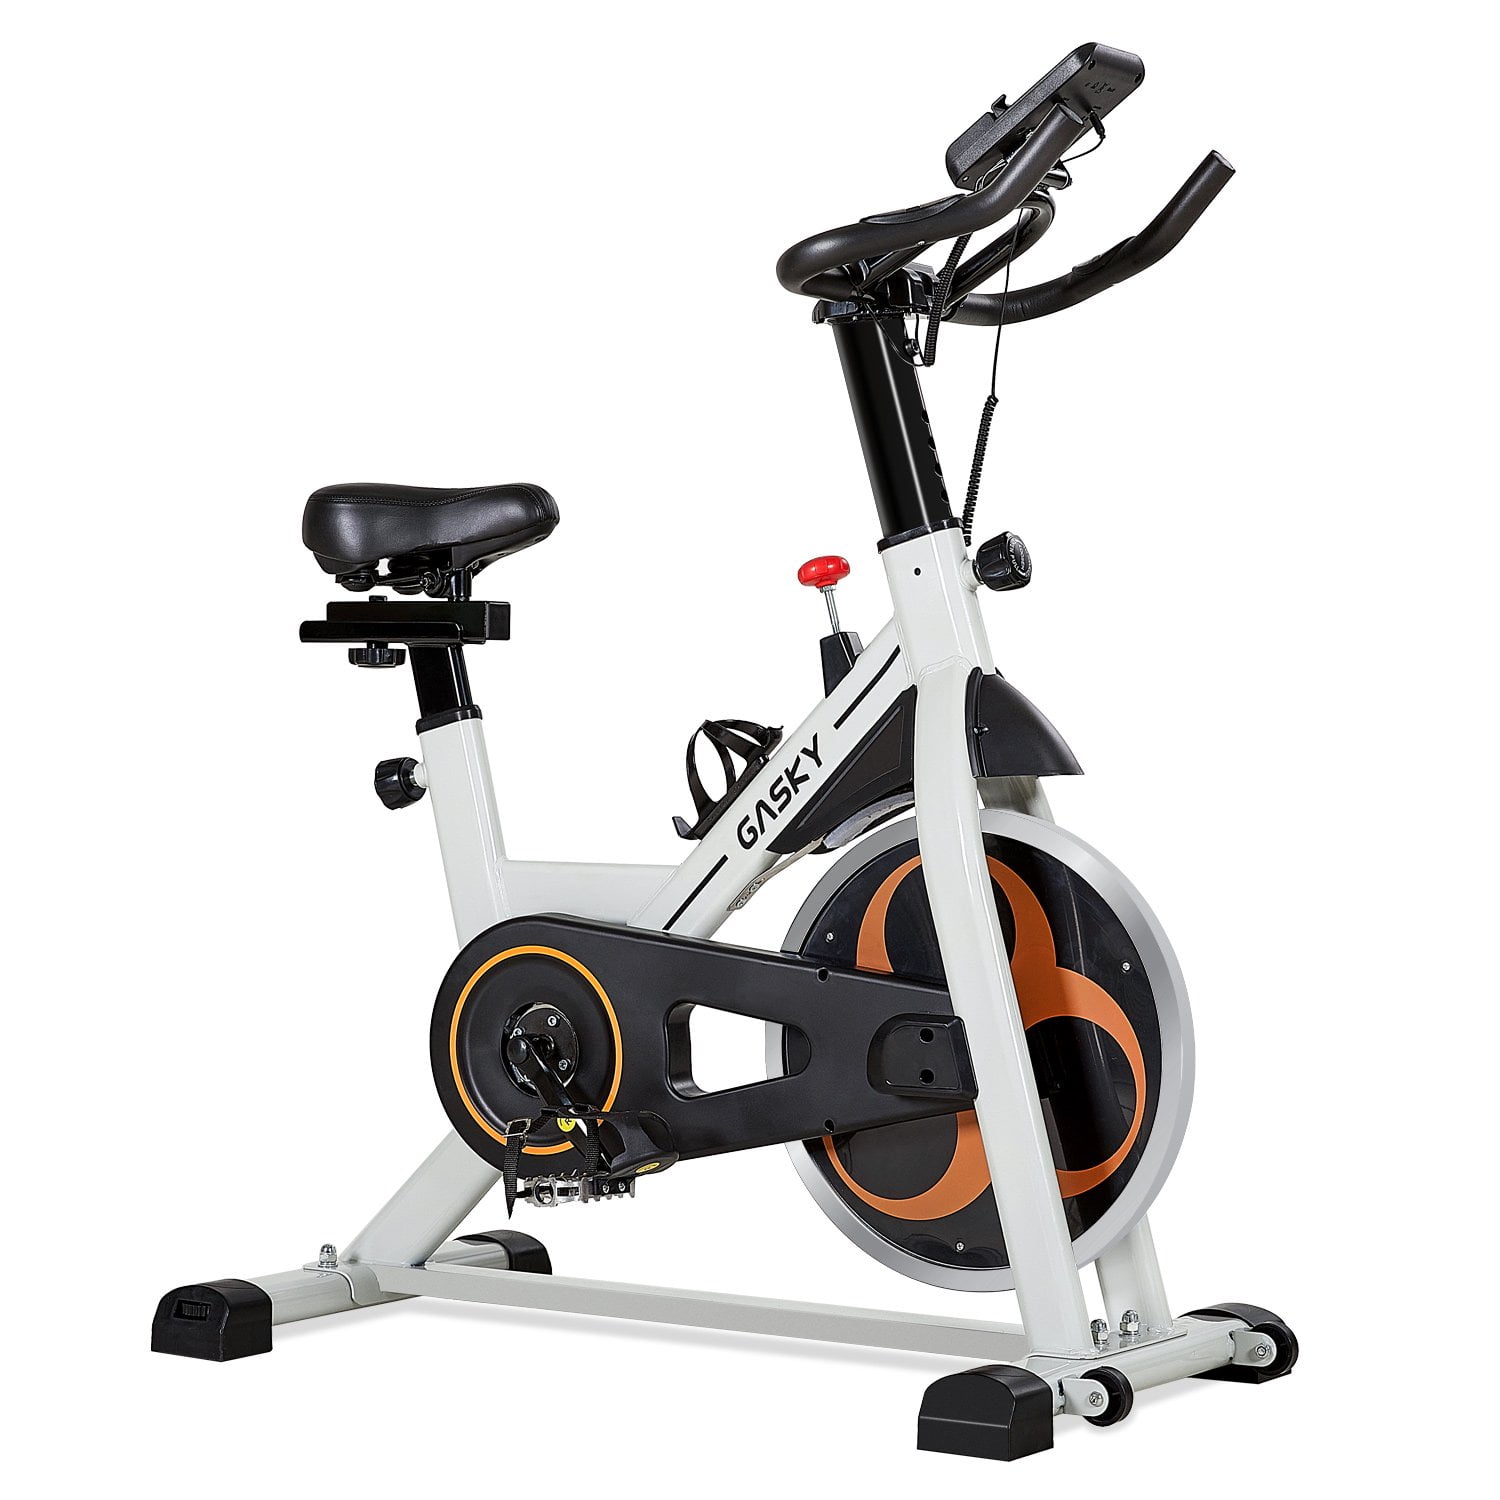 Details about   Portable Pedal Exerciser Leg Fitness Machine Mini bicycle Sport Gym Equipment 